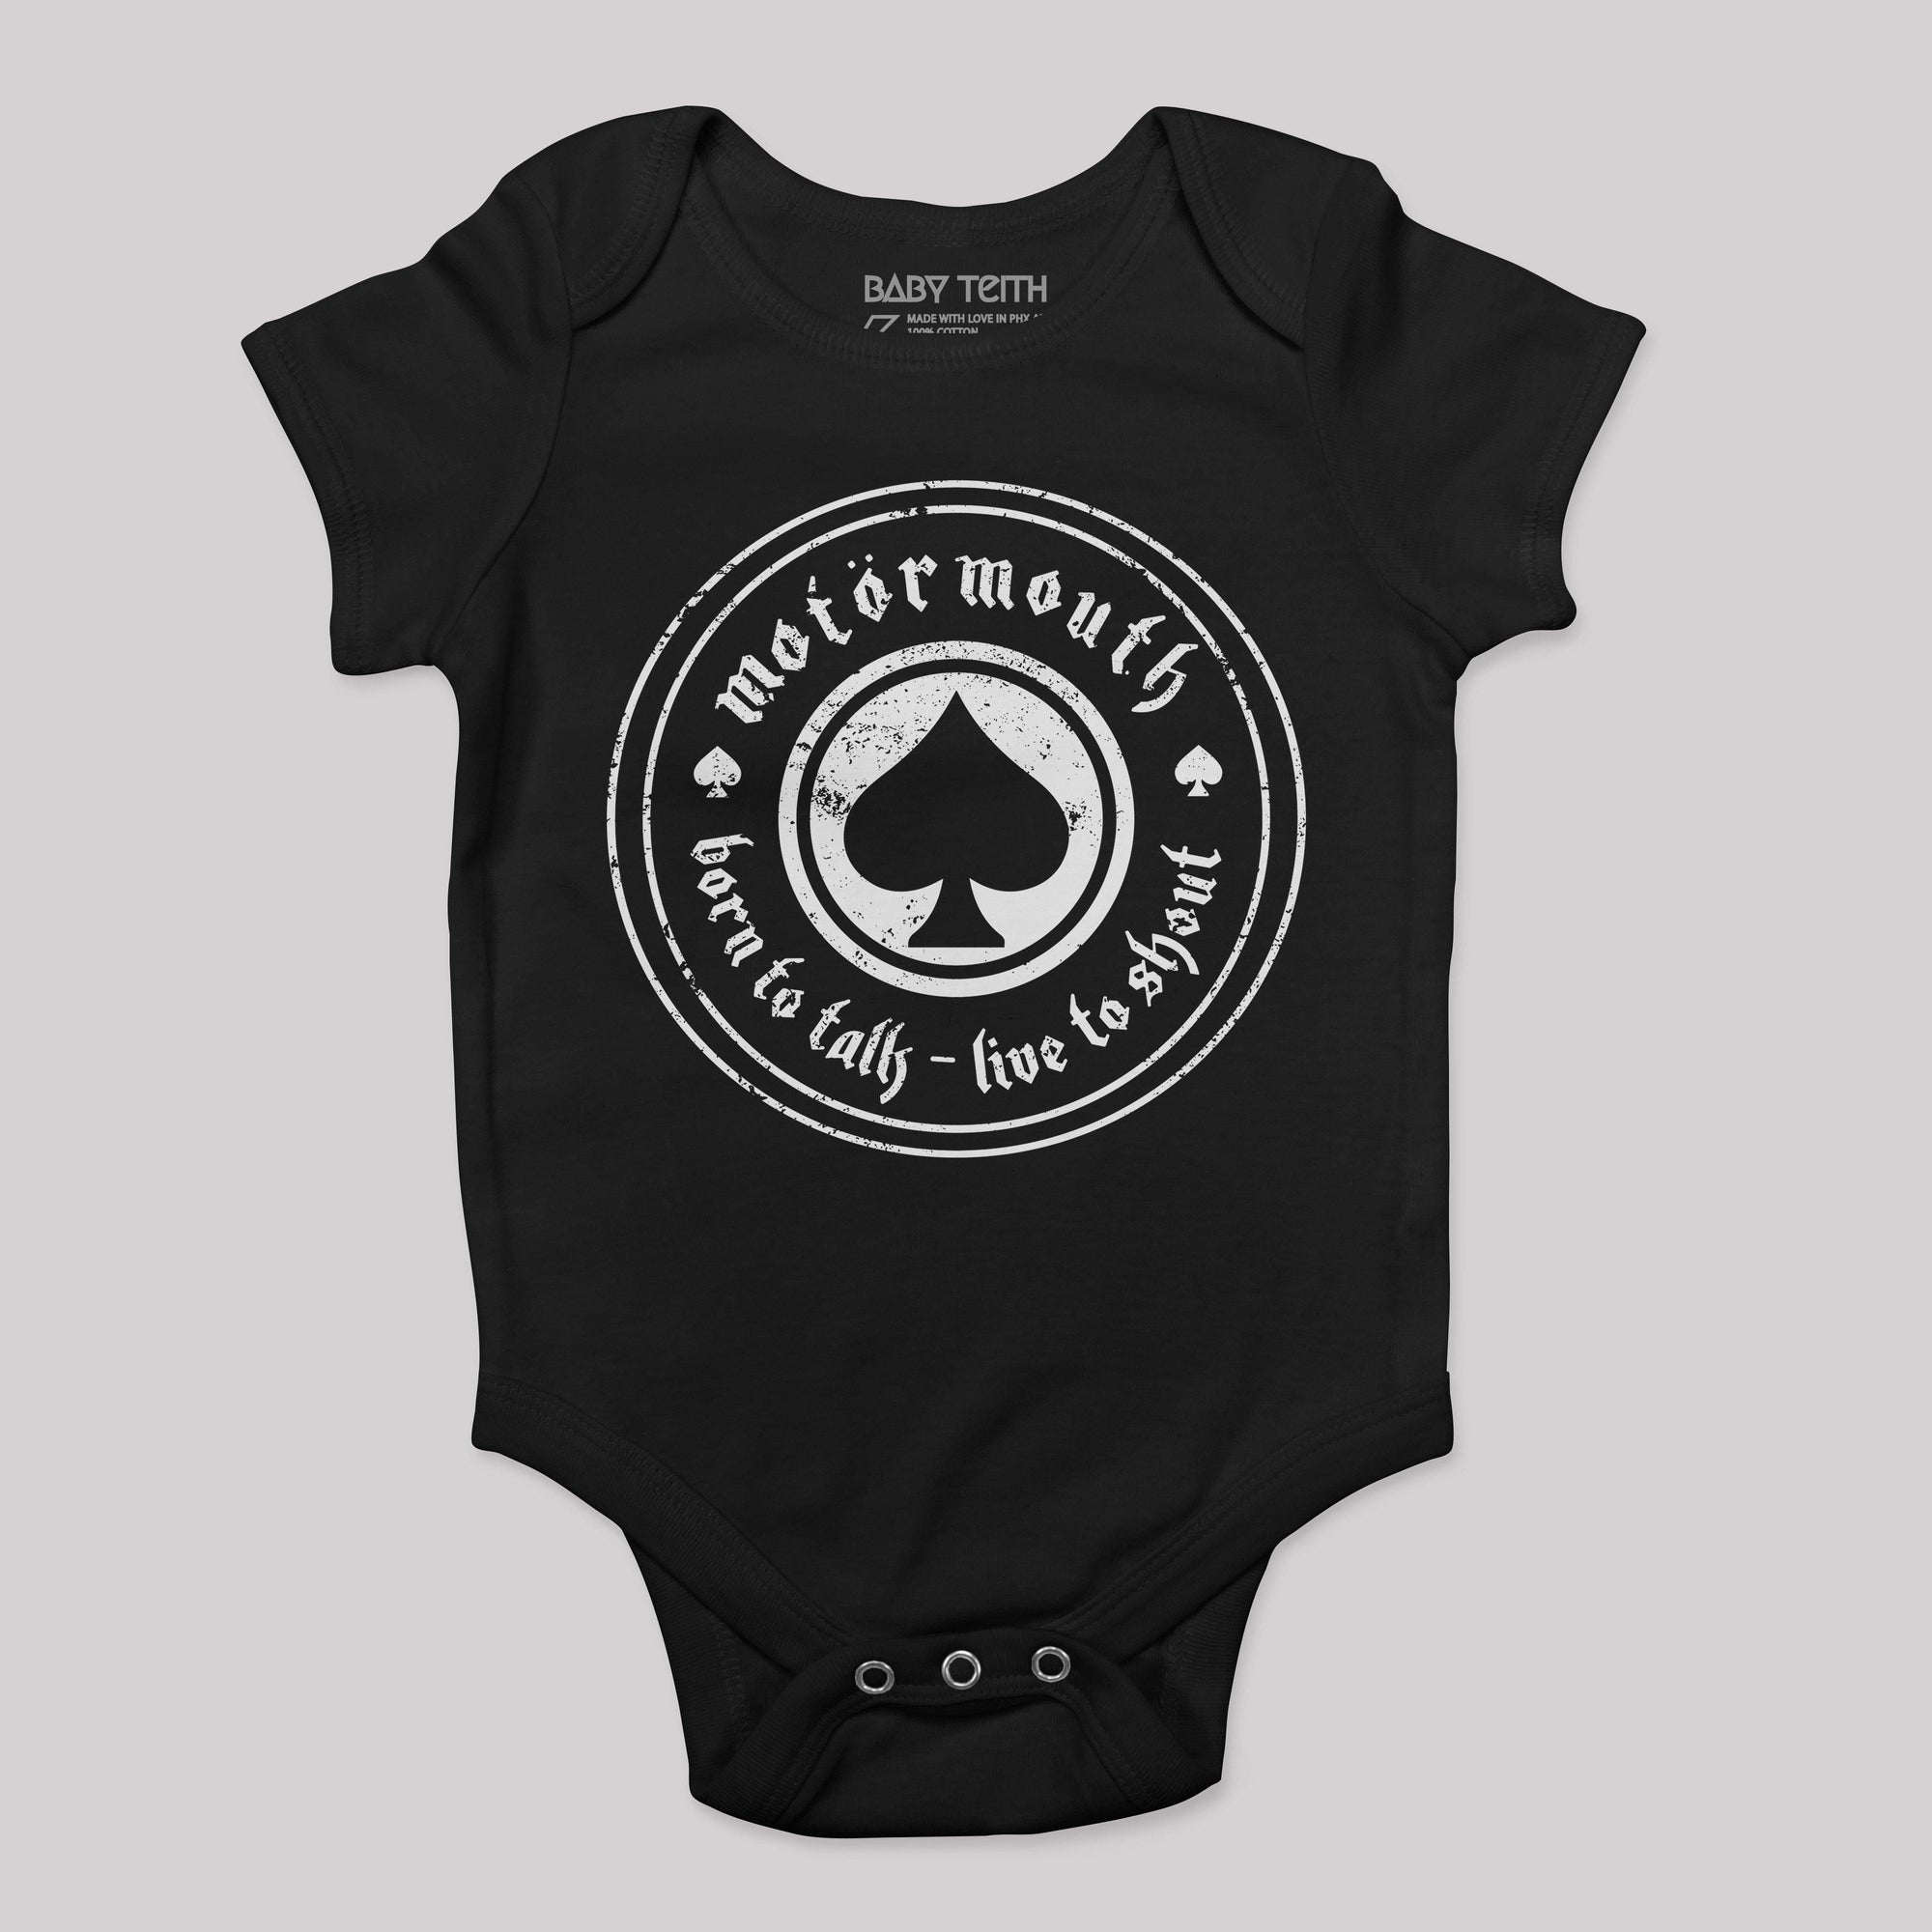 &quot;Motörmouth&quot; Bodysuit for Babies - Baby Teith